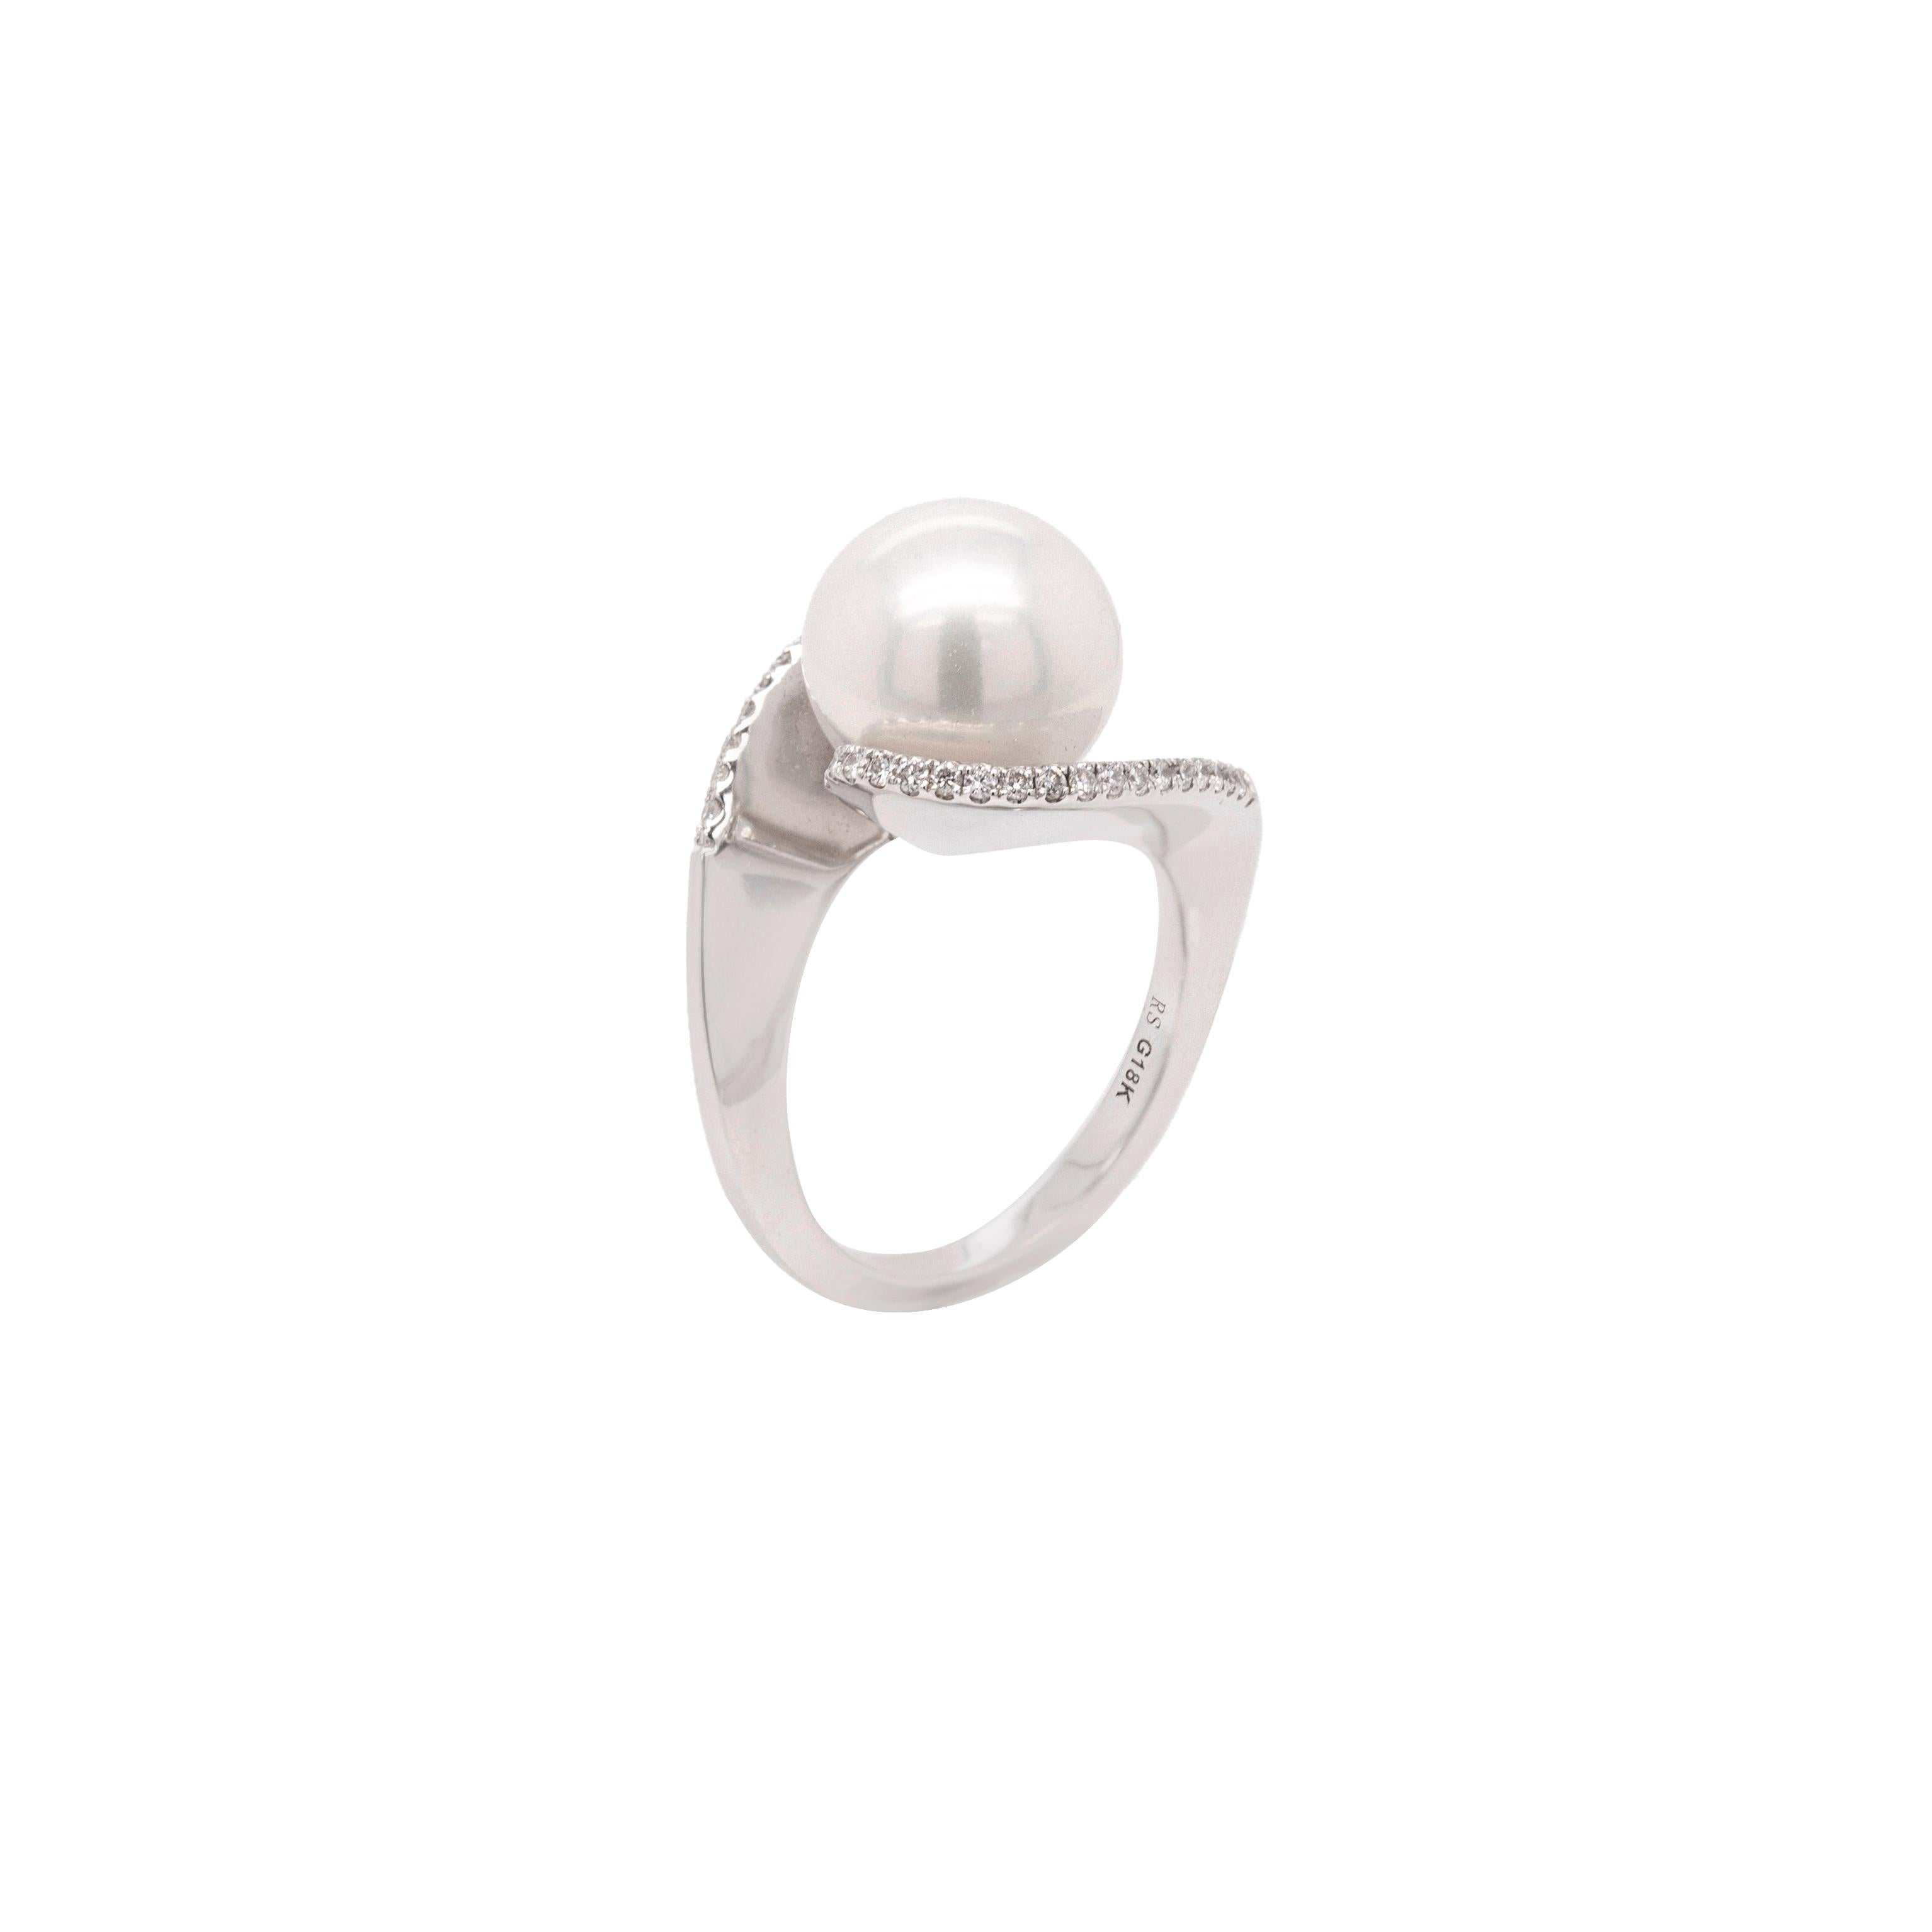 It doesn't get any more classic than the elegant and sophisticated combination of diamonds and pearls!
This charming cocktail ring, finely crafted from high polish 18 carat white gold, showcases an 11mm Southsea pearl which appears to balance atop a